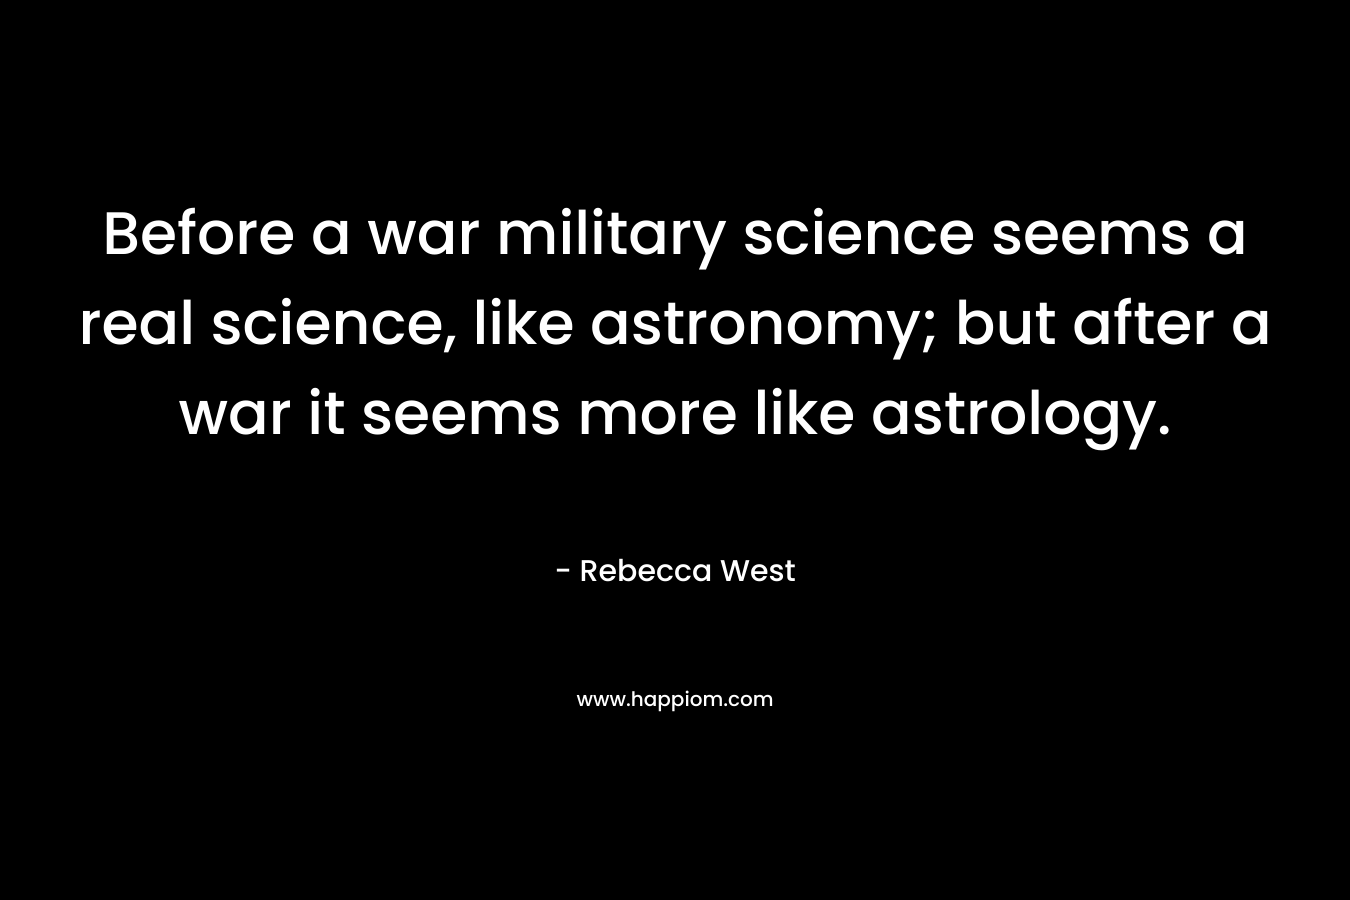 Before a war military science seems a real science, like astronomy; but after a war it seems more like astrology.